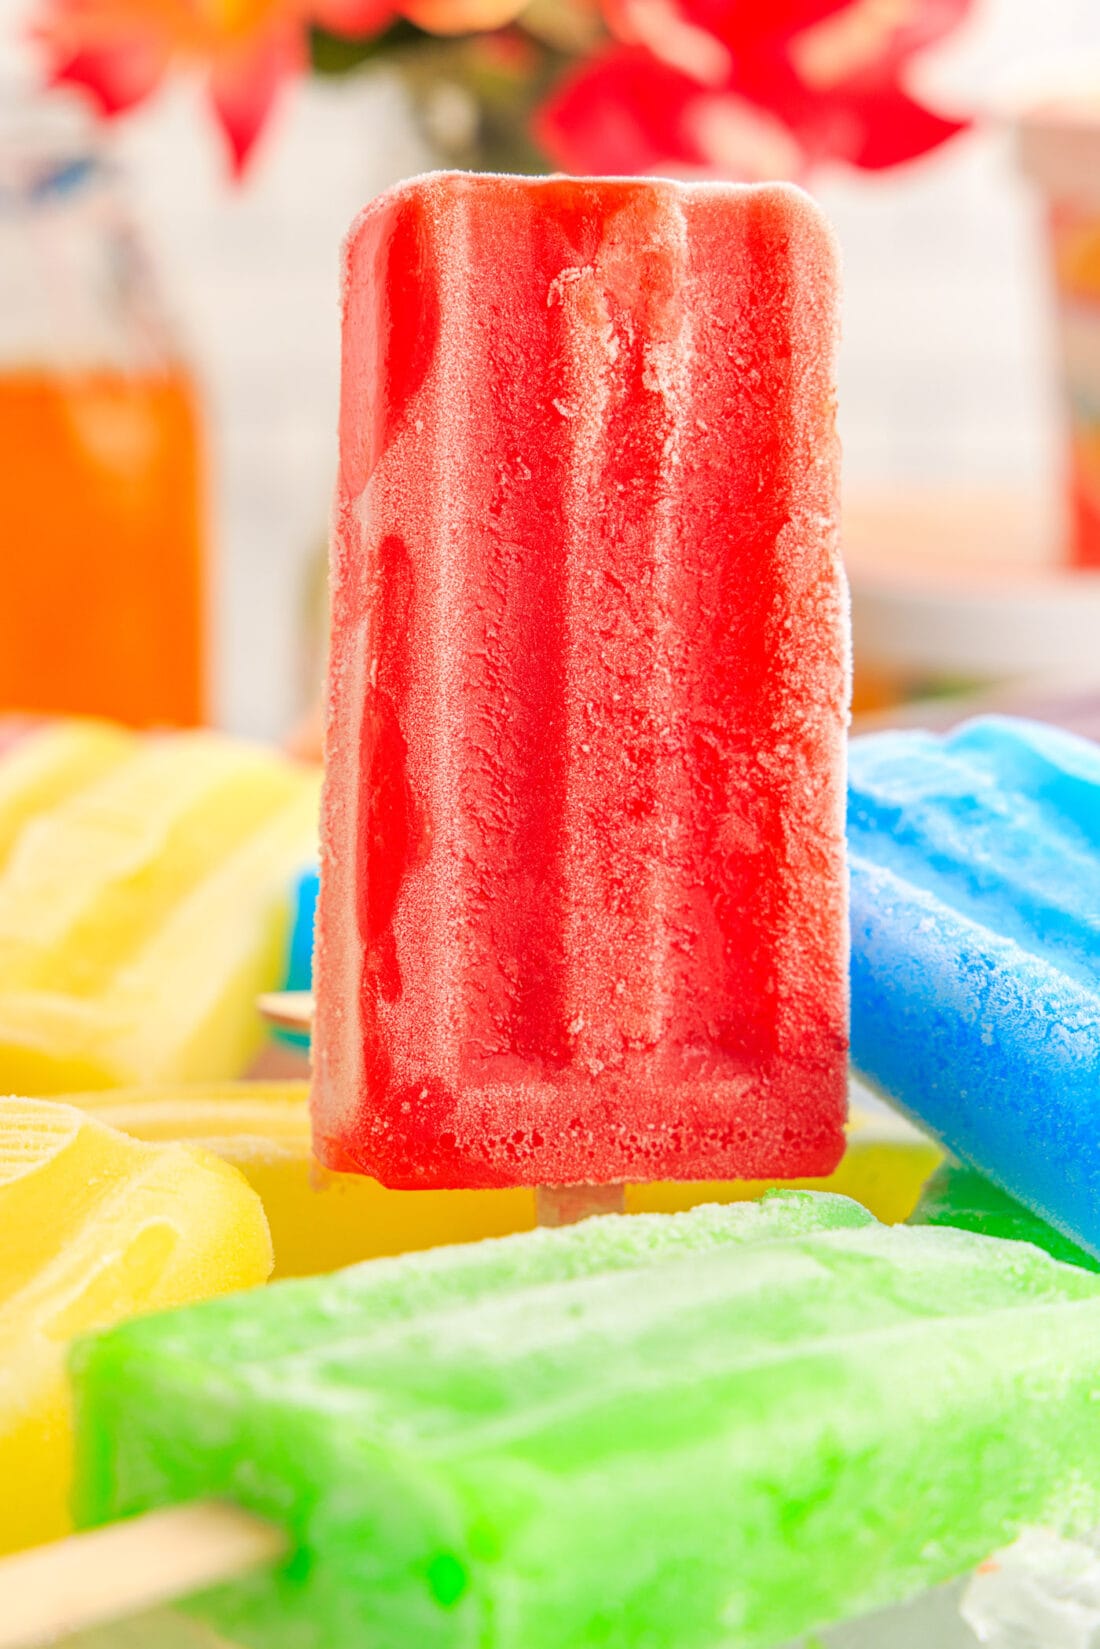 Red Jello Popsicle standing in a bowl of other Jello Popsicles